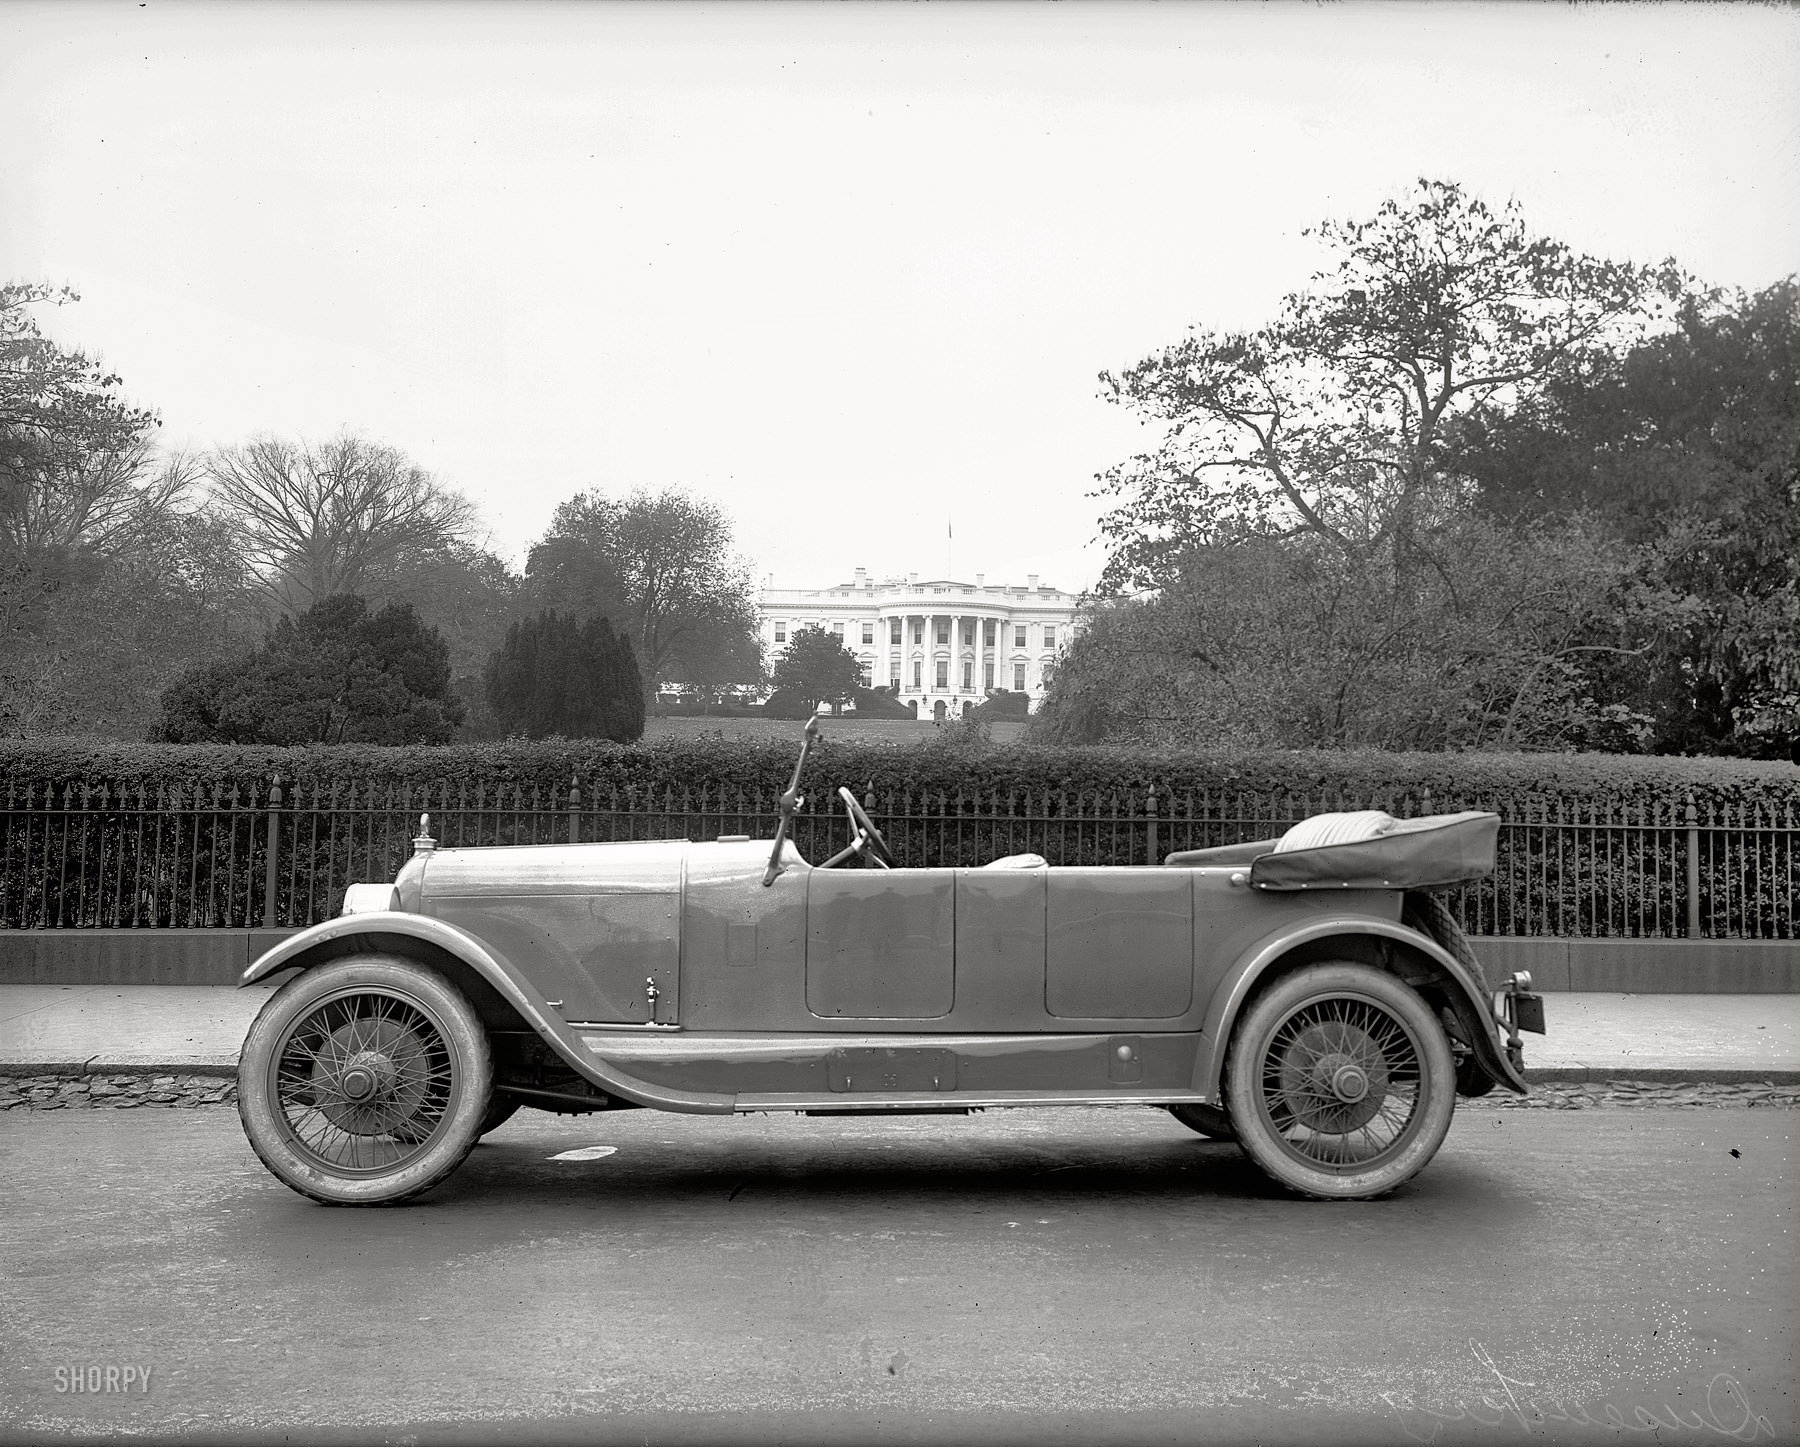 Circa 1921. "Duesenberg car at White House." Reflecting a modest entourage. National Photo Company Collection glass negative. View full size.